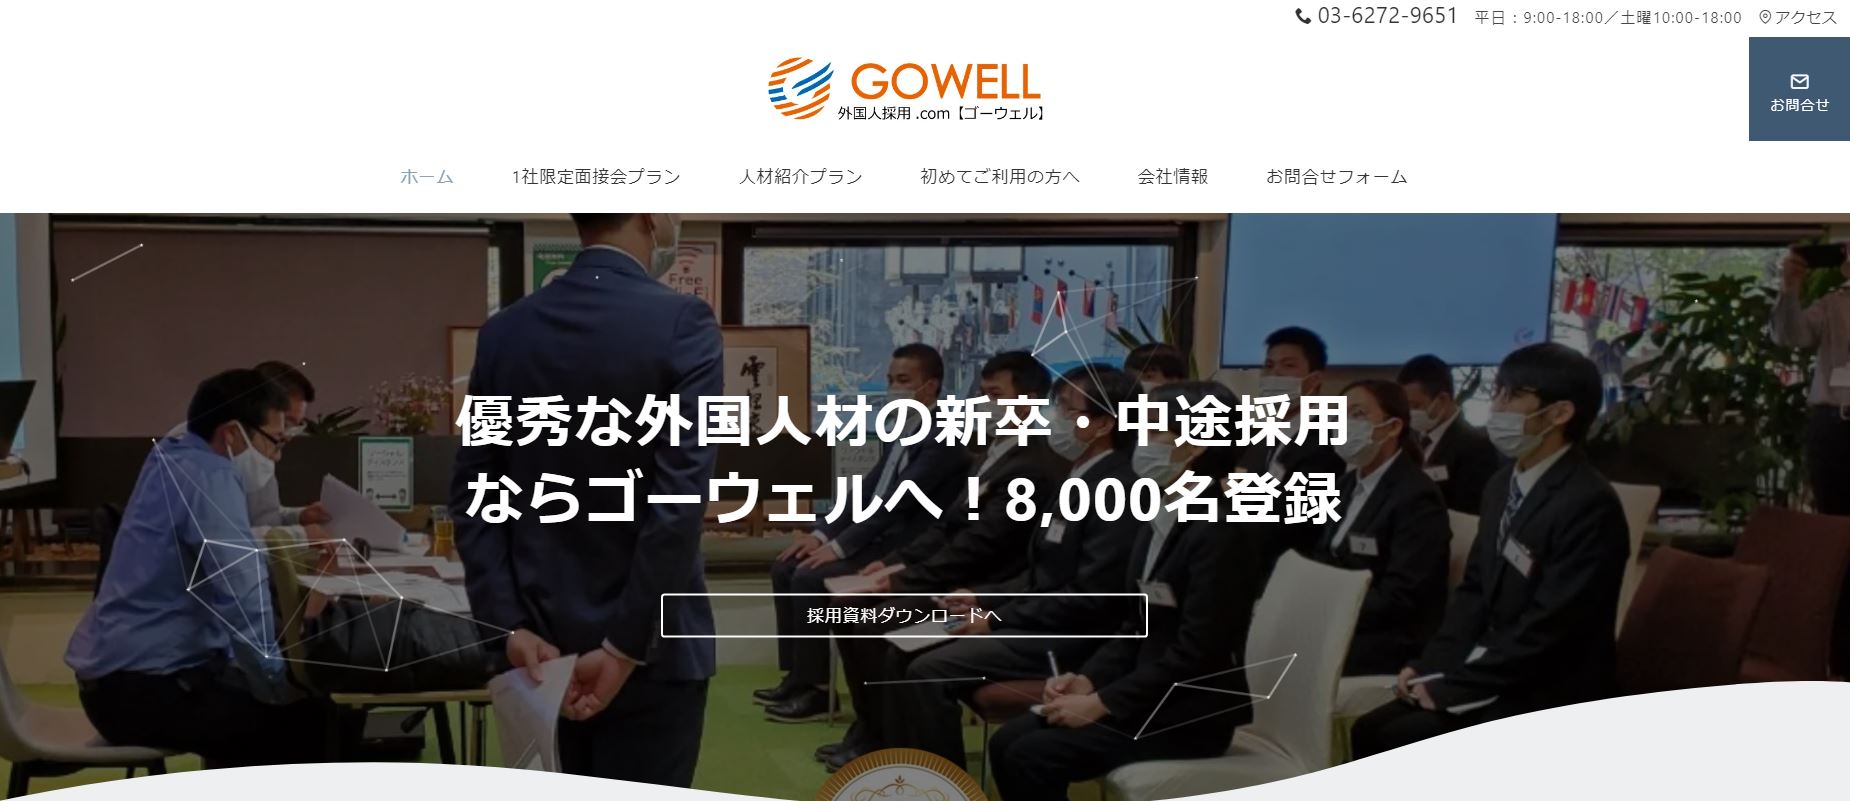 gowell